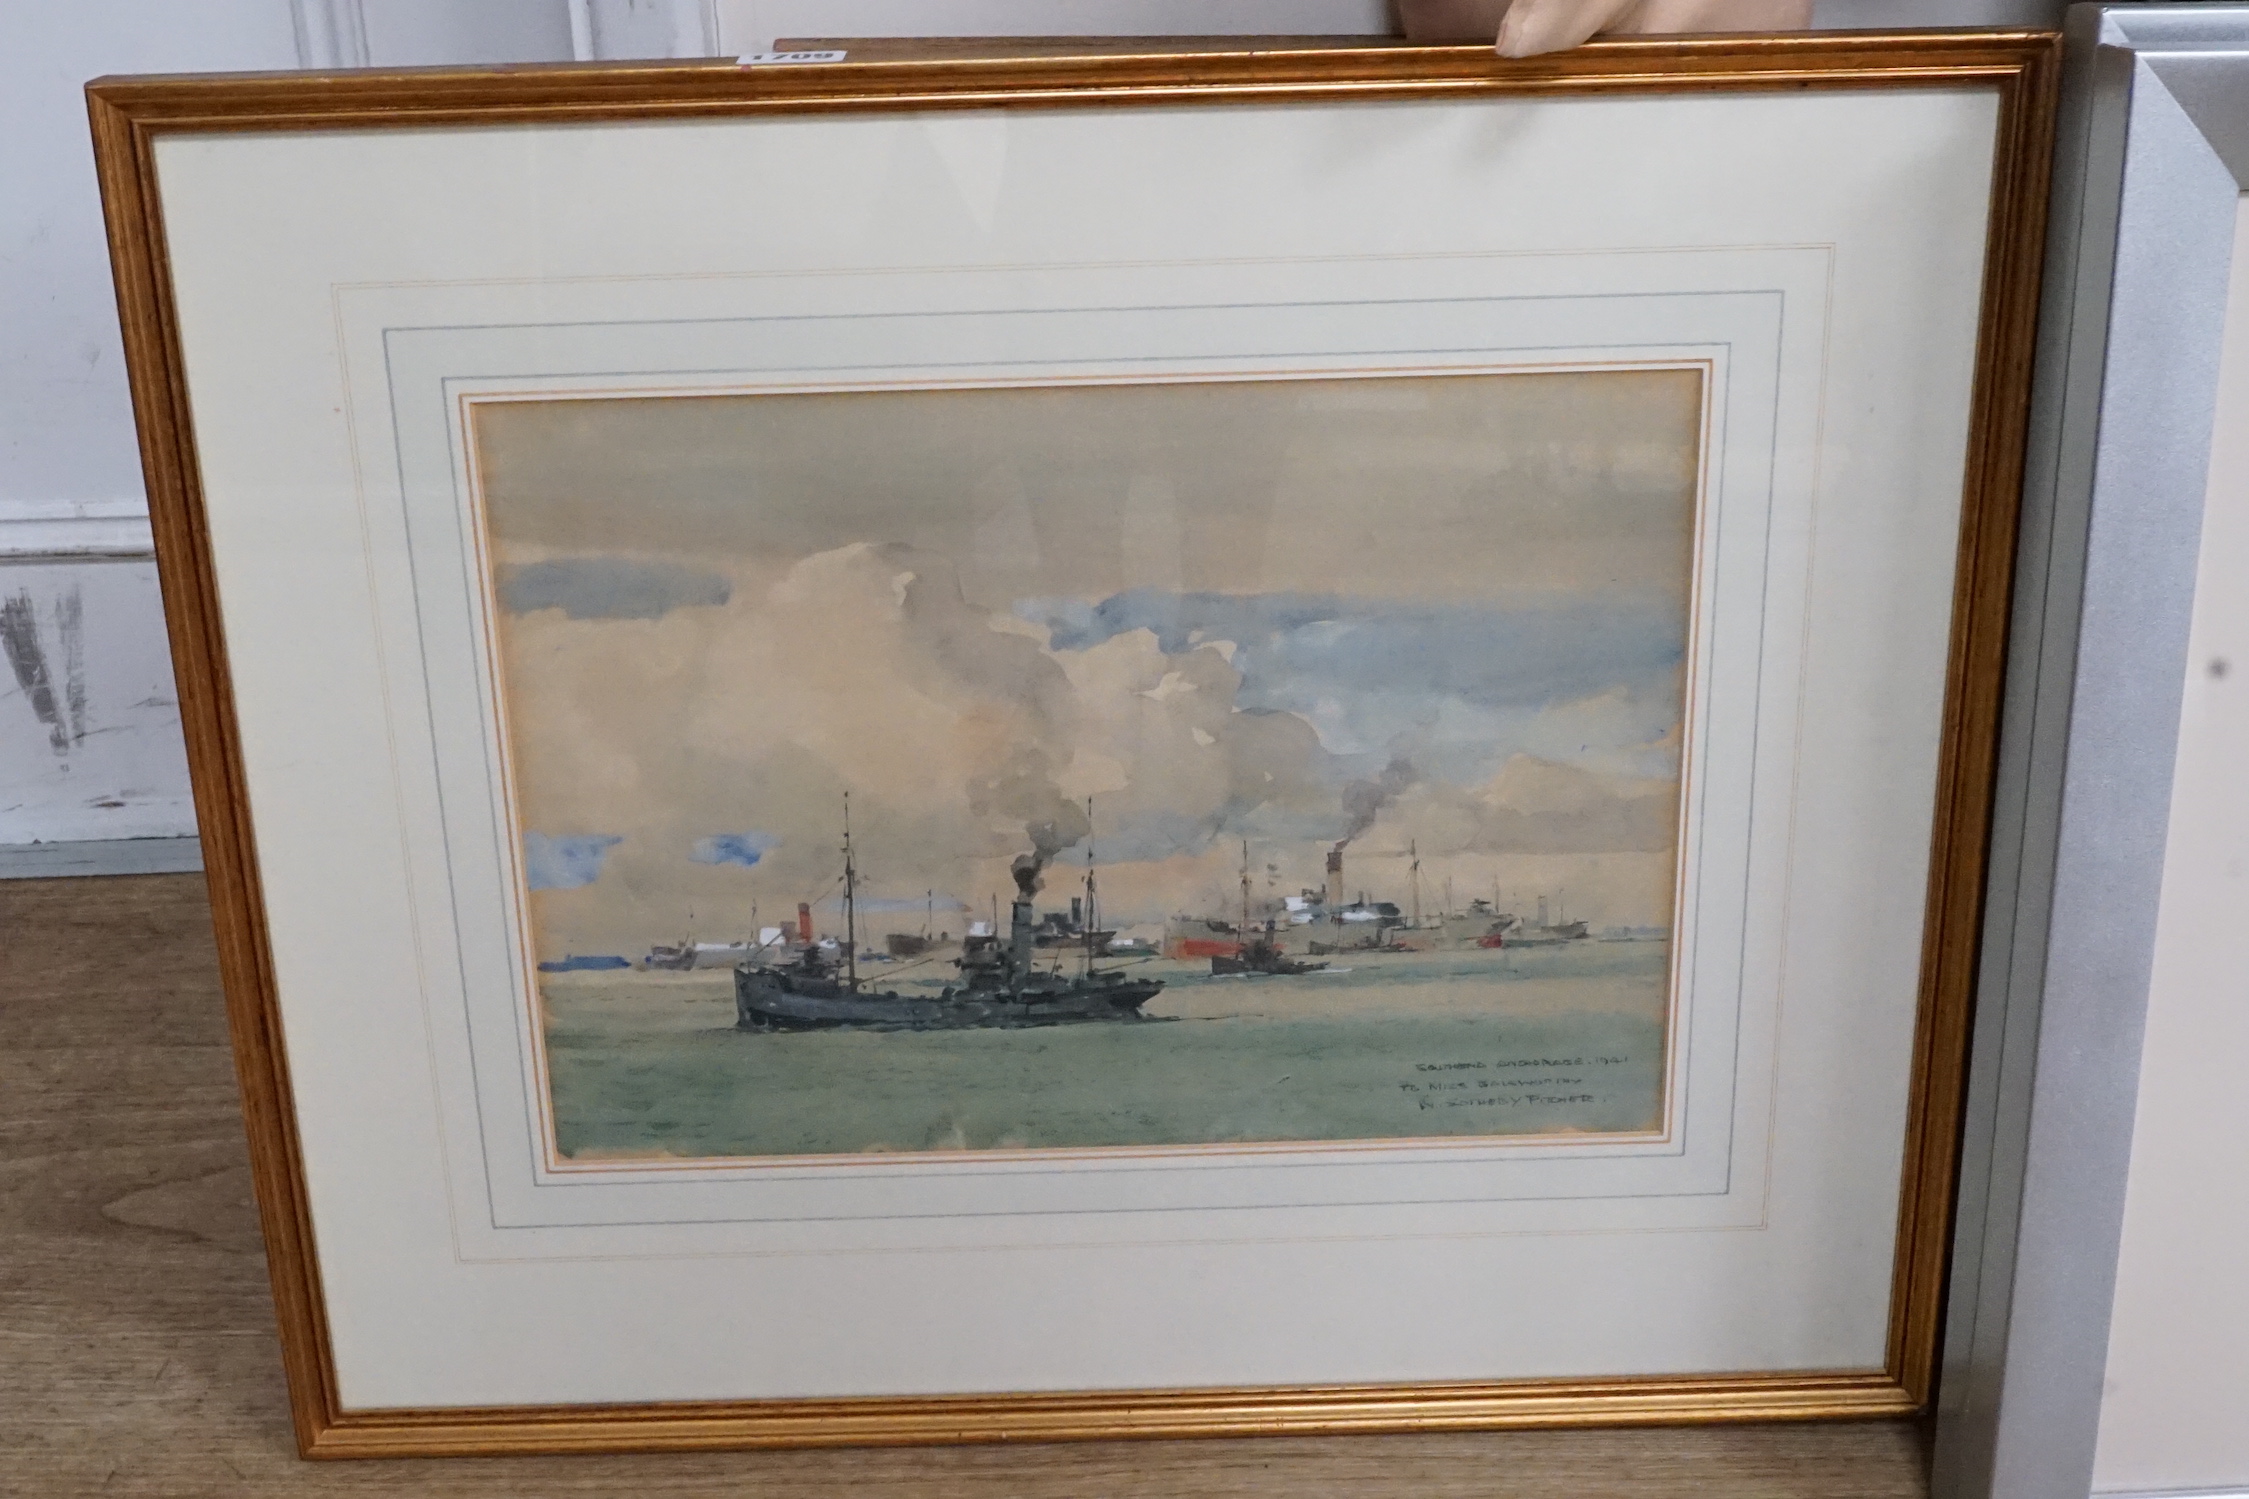 Neville Sotheby Pitcher (1889-1959), watercolour, 'Southend Anchorage 1941', signed, 26 x 37cm